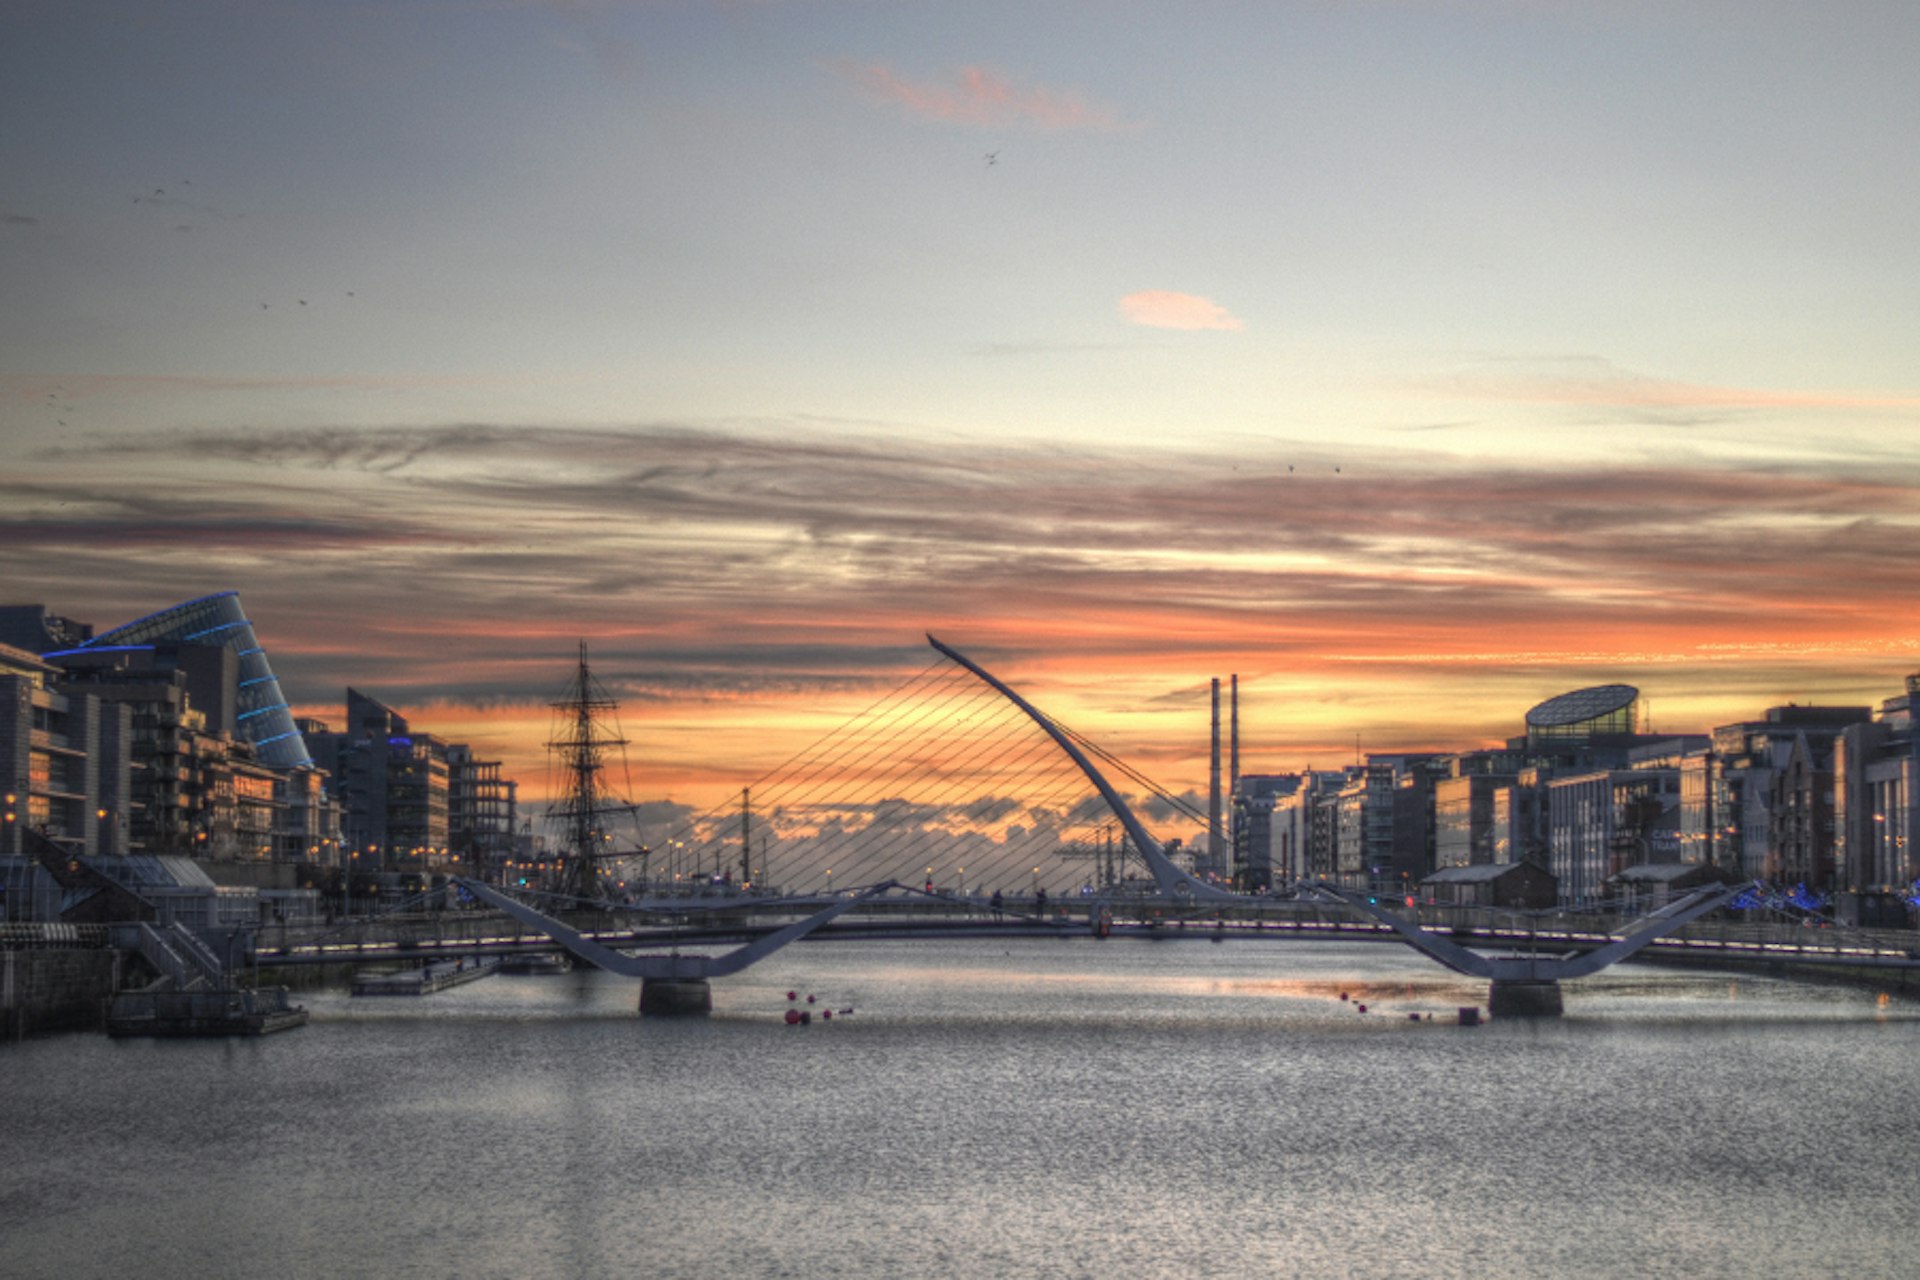 The Samuel Beckett Bridge across the Liffey – a modern feature in a historic city. Image by Miguel Mendez / CC BY 2.0